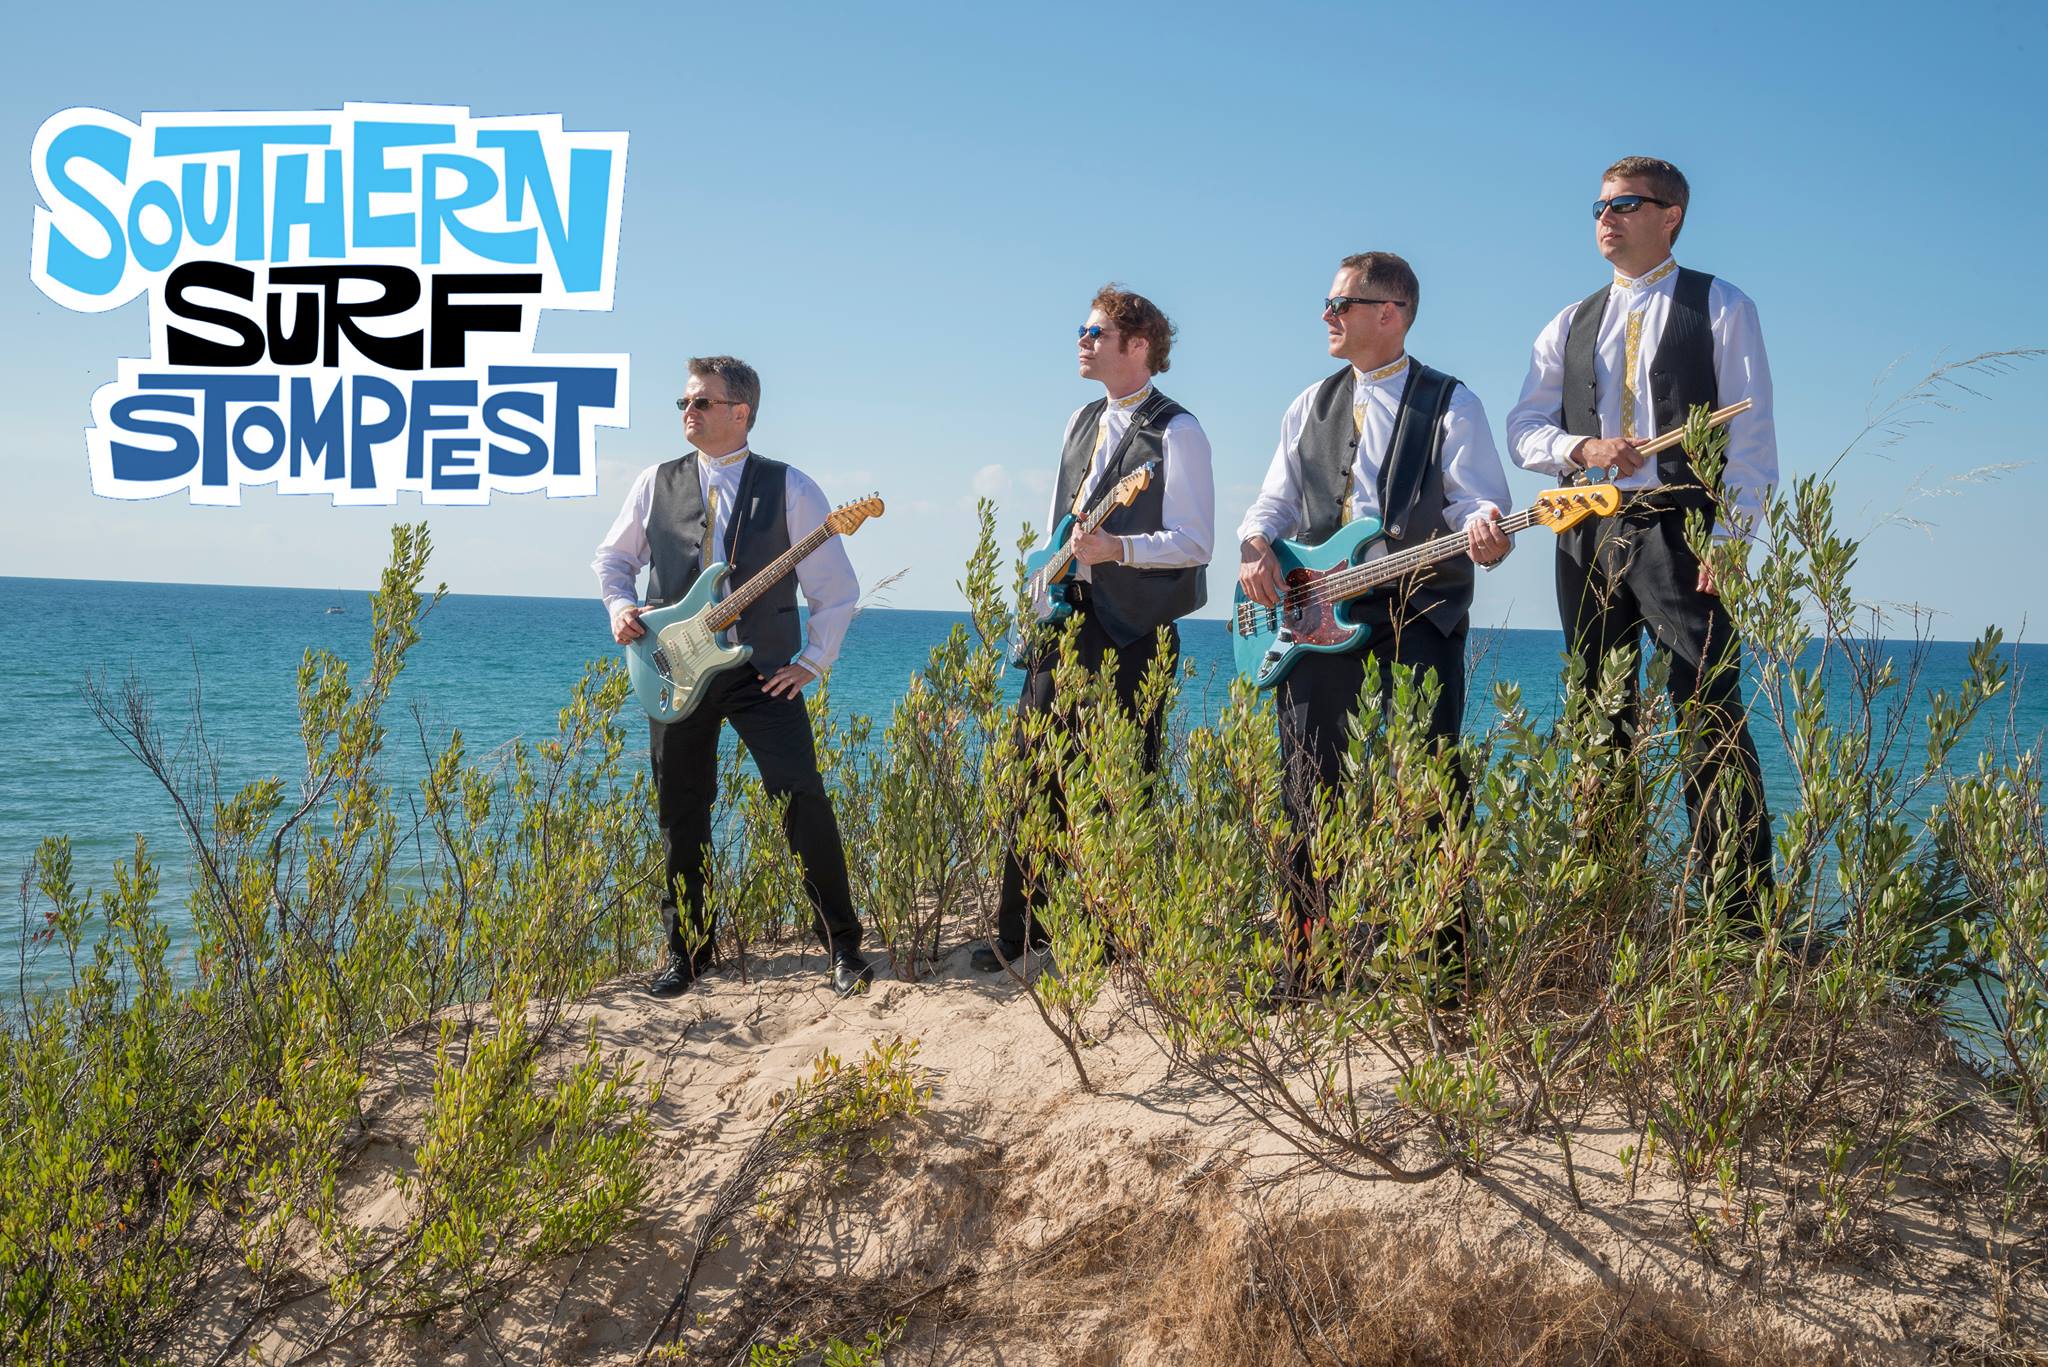 Southern Surf StompFest! 2019 Creative Loafing